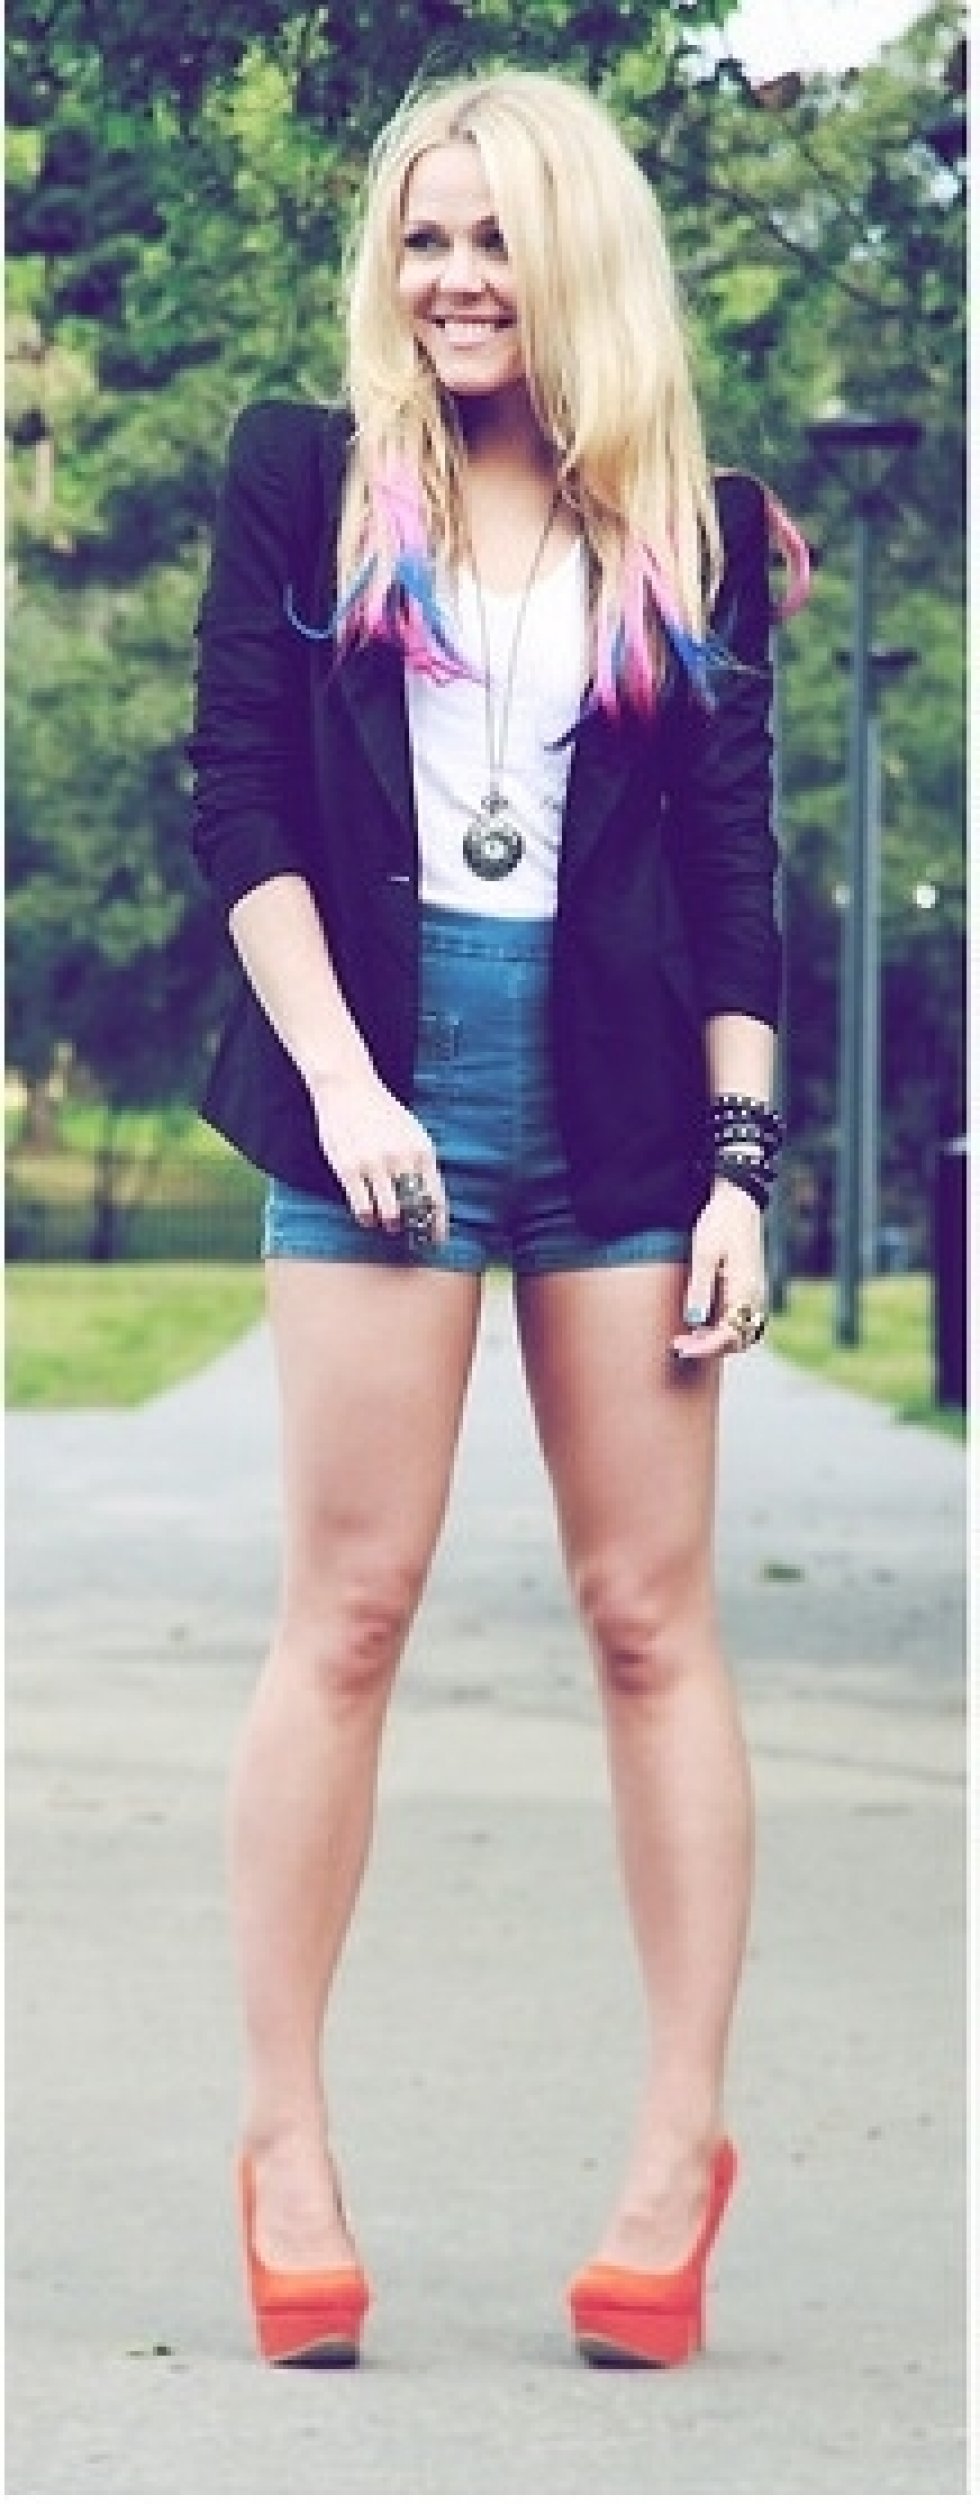 http://lookbook.nu/look/2667295-Win-a-pair-of-these-shoes-on-my-blog - Sommertendens 2012: Lårkorte shorts